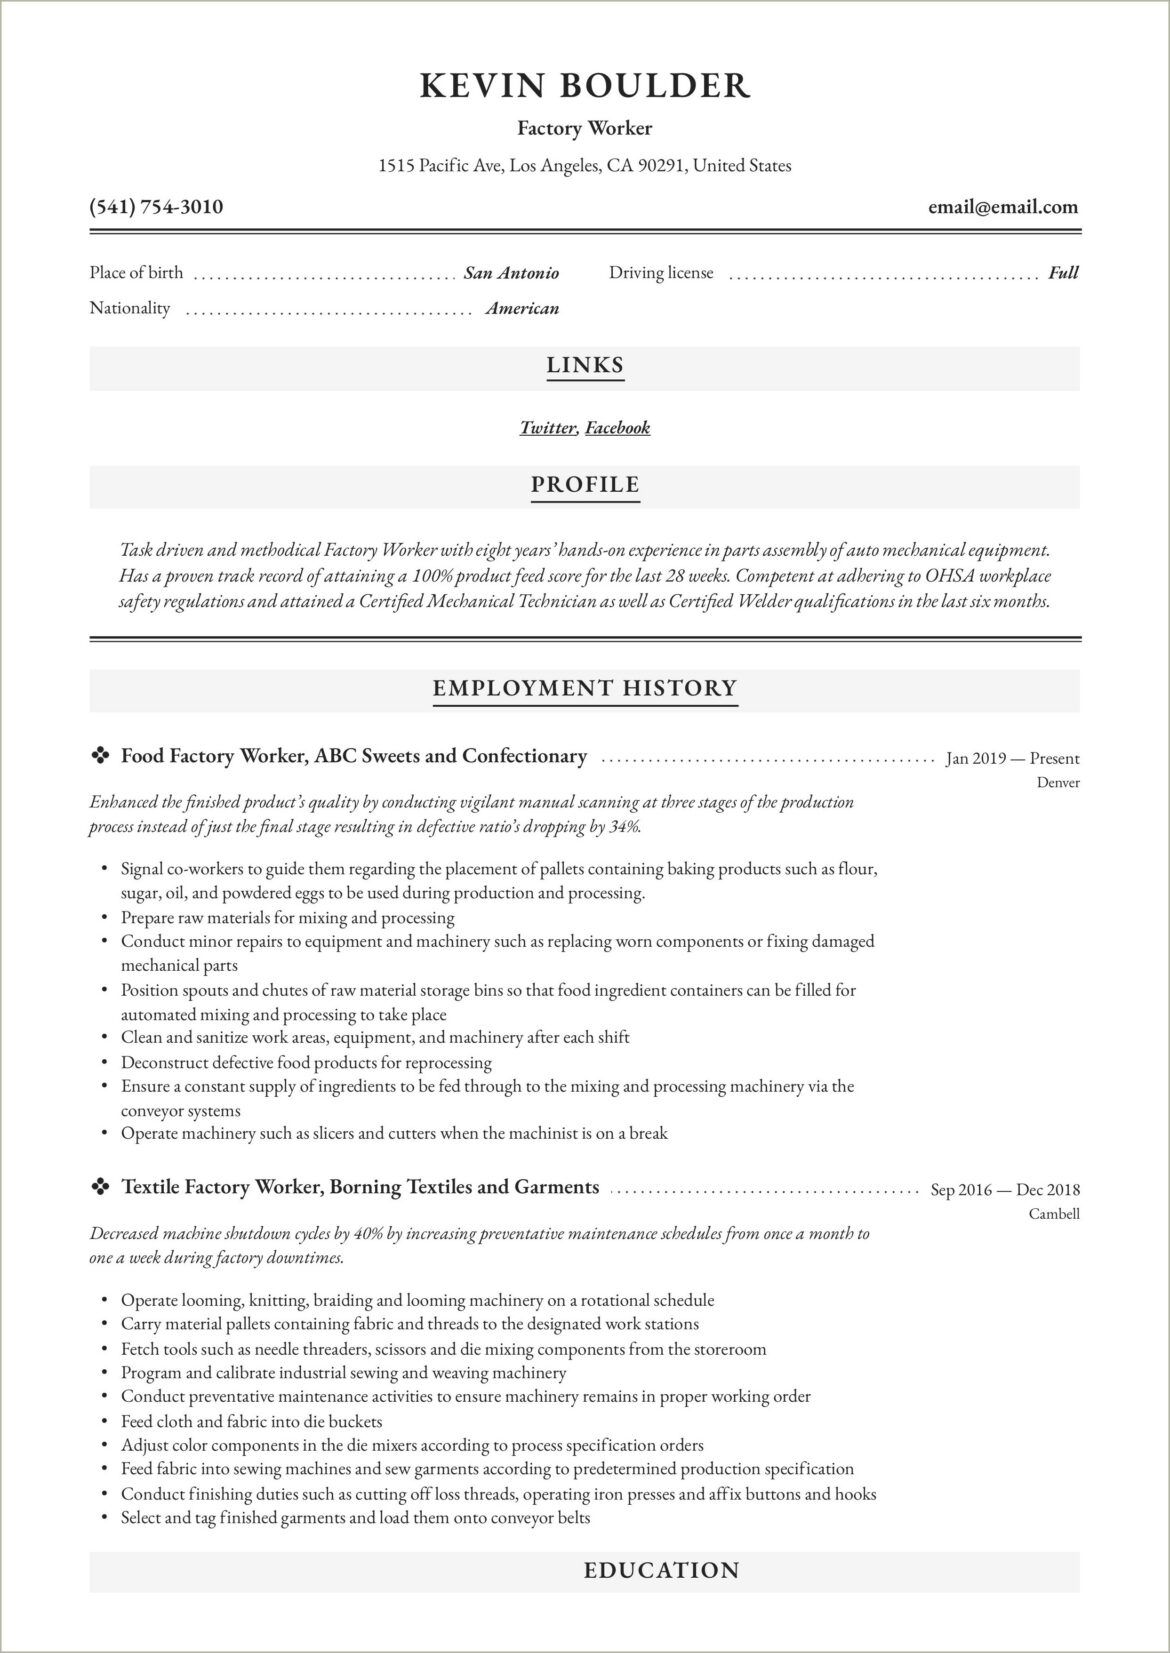 Sample Resume For Factory Worker Abroad